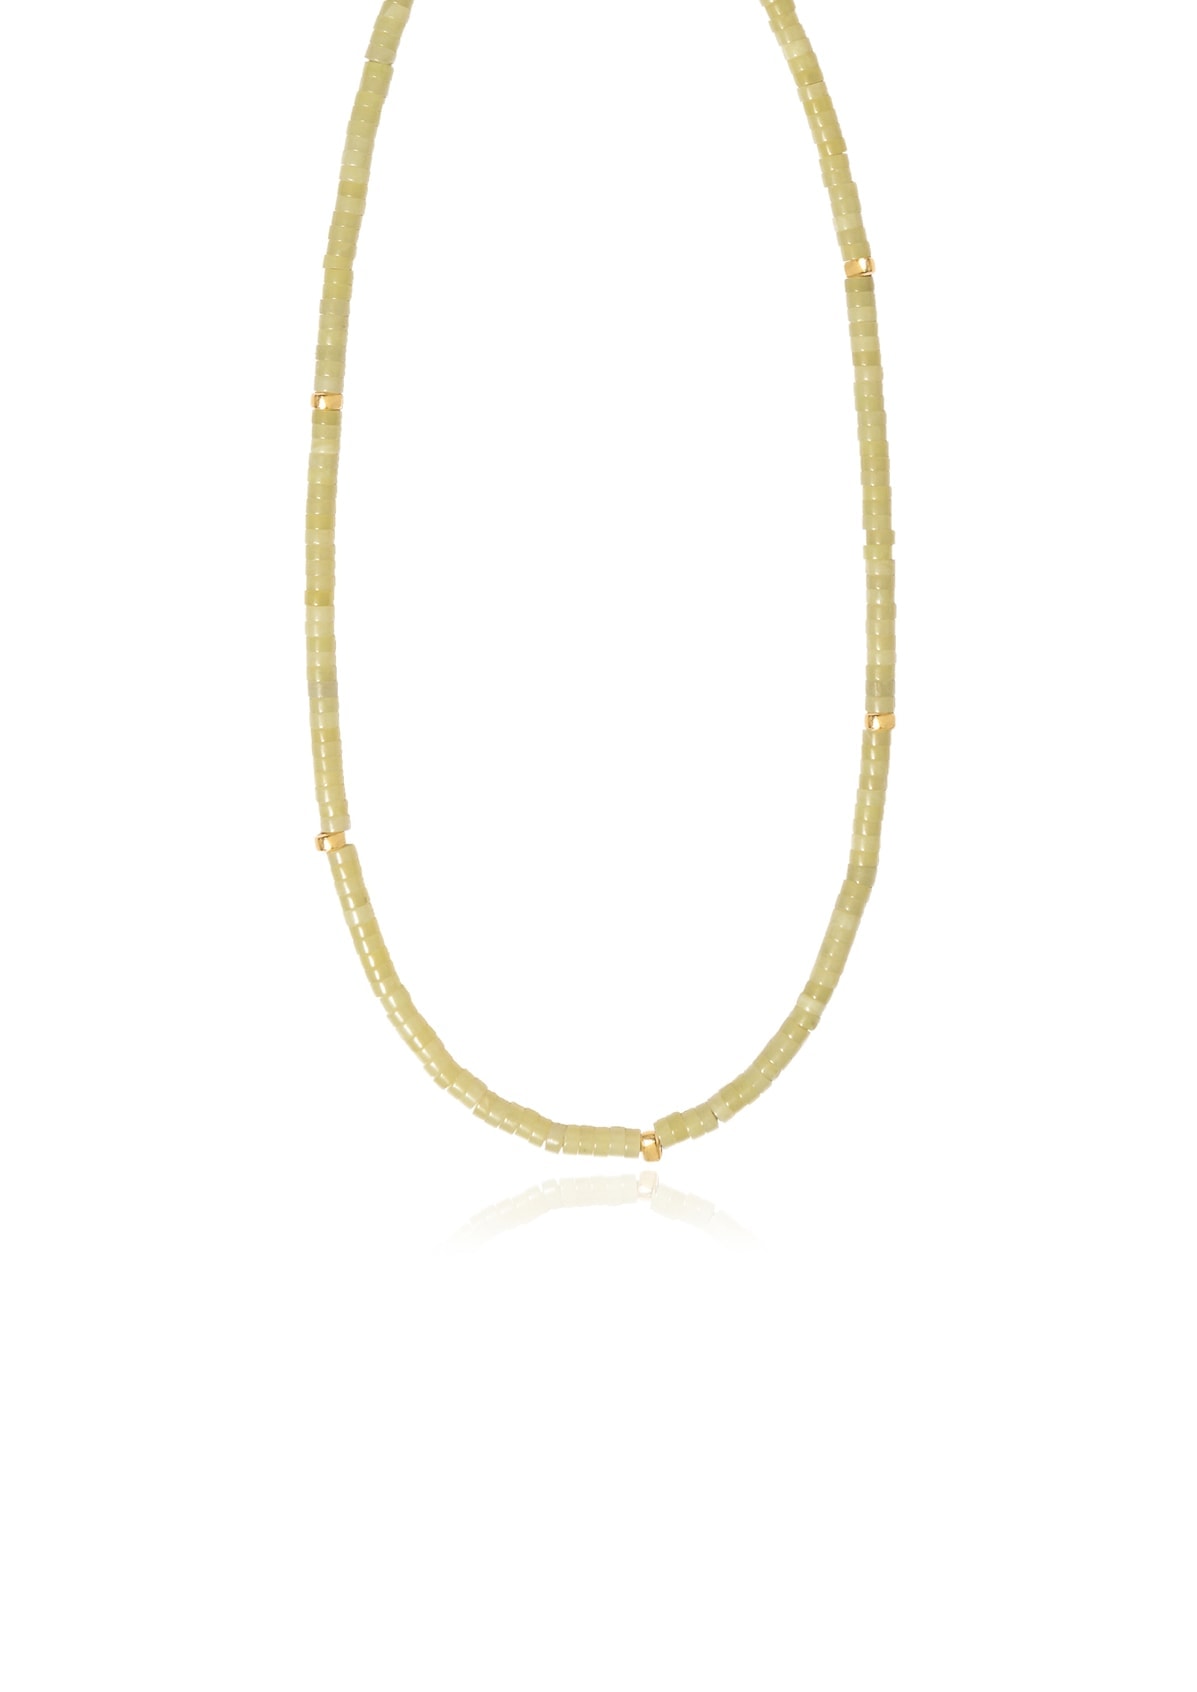 HOW TO LOSE A GUY NECKLACE - HERMINA ATHENS X STYLELOVE COLLECTION